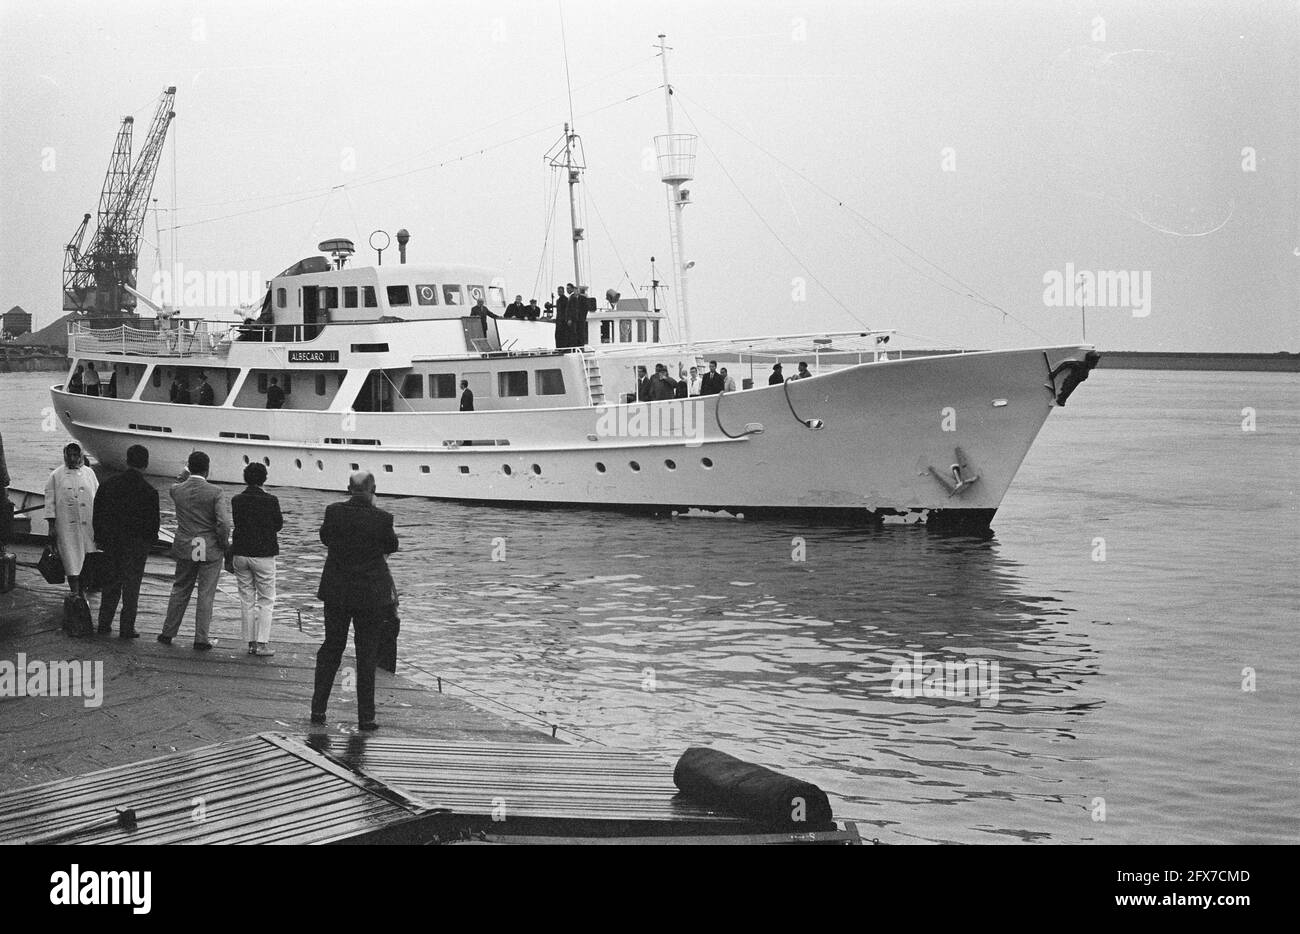 Prince Rainier's yacht on fire due to explosion in engine room. The yacht enters the port of Delfzijl with tugboat assistance, 14 August 1963, YACHT, ports, The Netherlands, 20th century press agency photo, news to remember, documentary, historic photography 1945-1990, visual stories, human history of the Twentieth Century, capturing moments in time Stock Photo